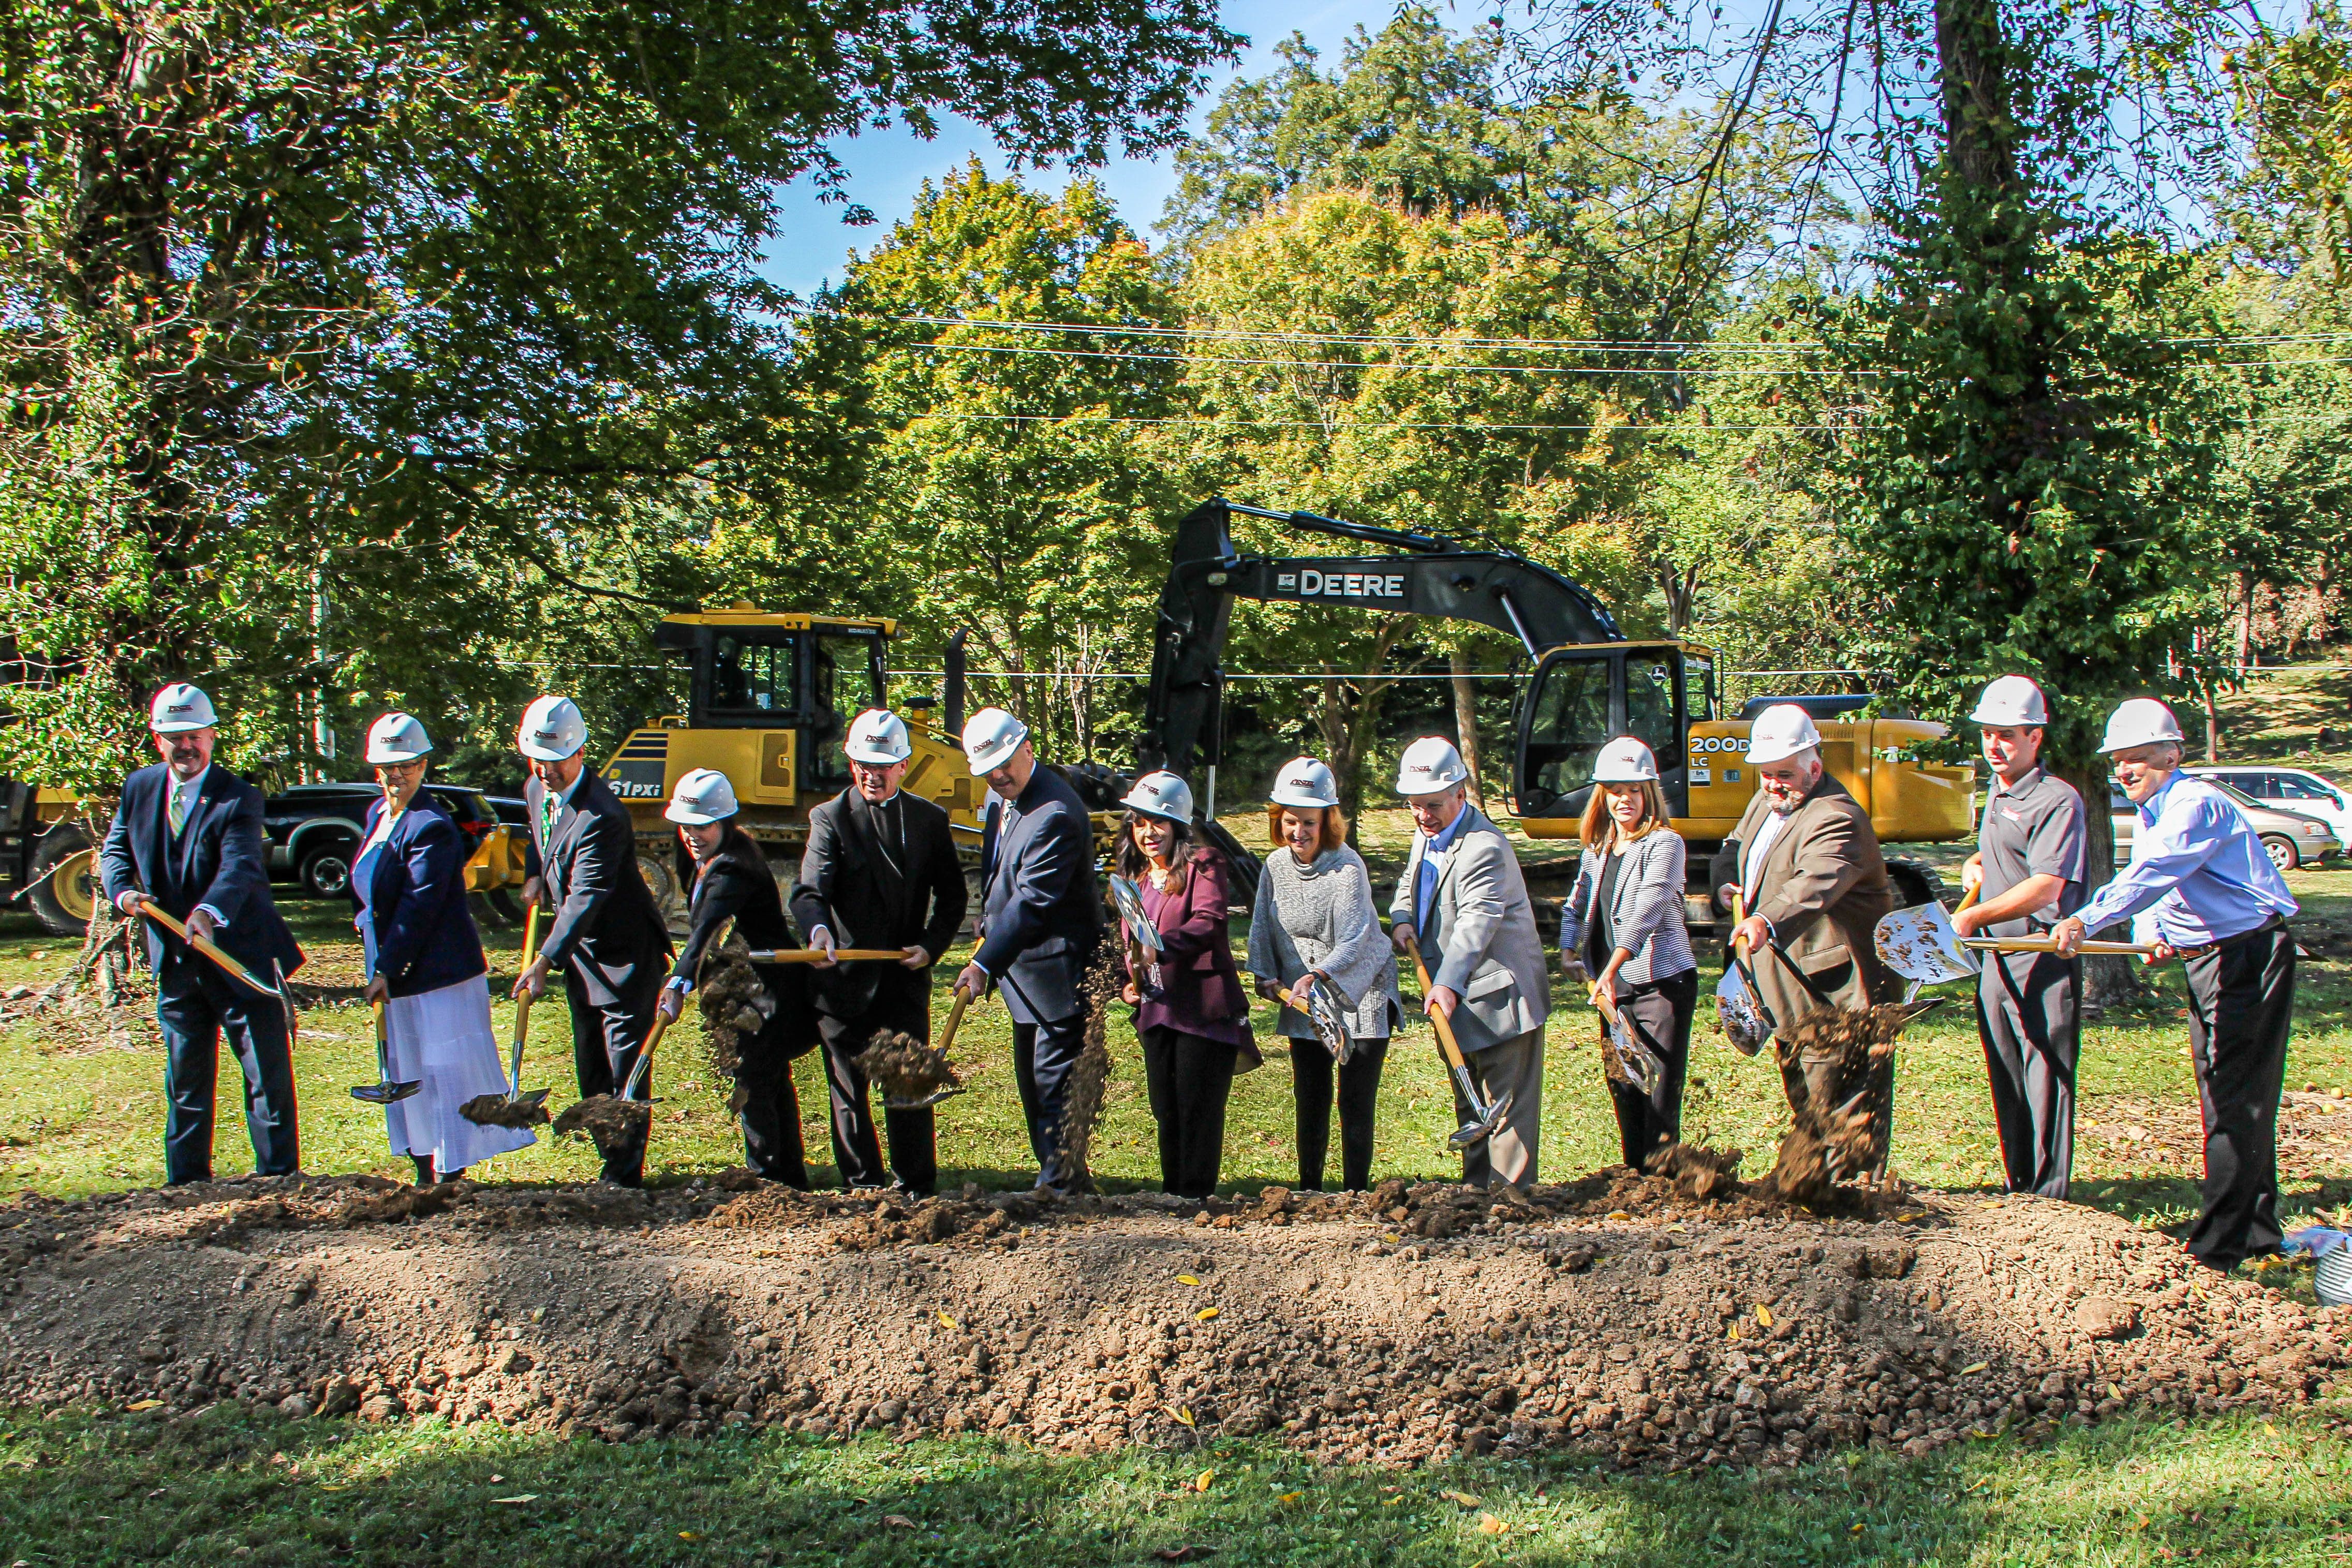 IN THE NEWS - (Cape Girardeau - KFVS12) - Groundbreaking held for new crisis maternity home in Cape Girardeau